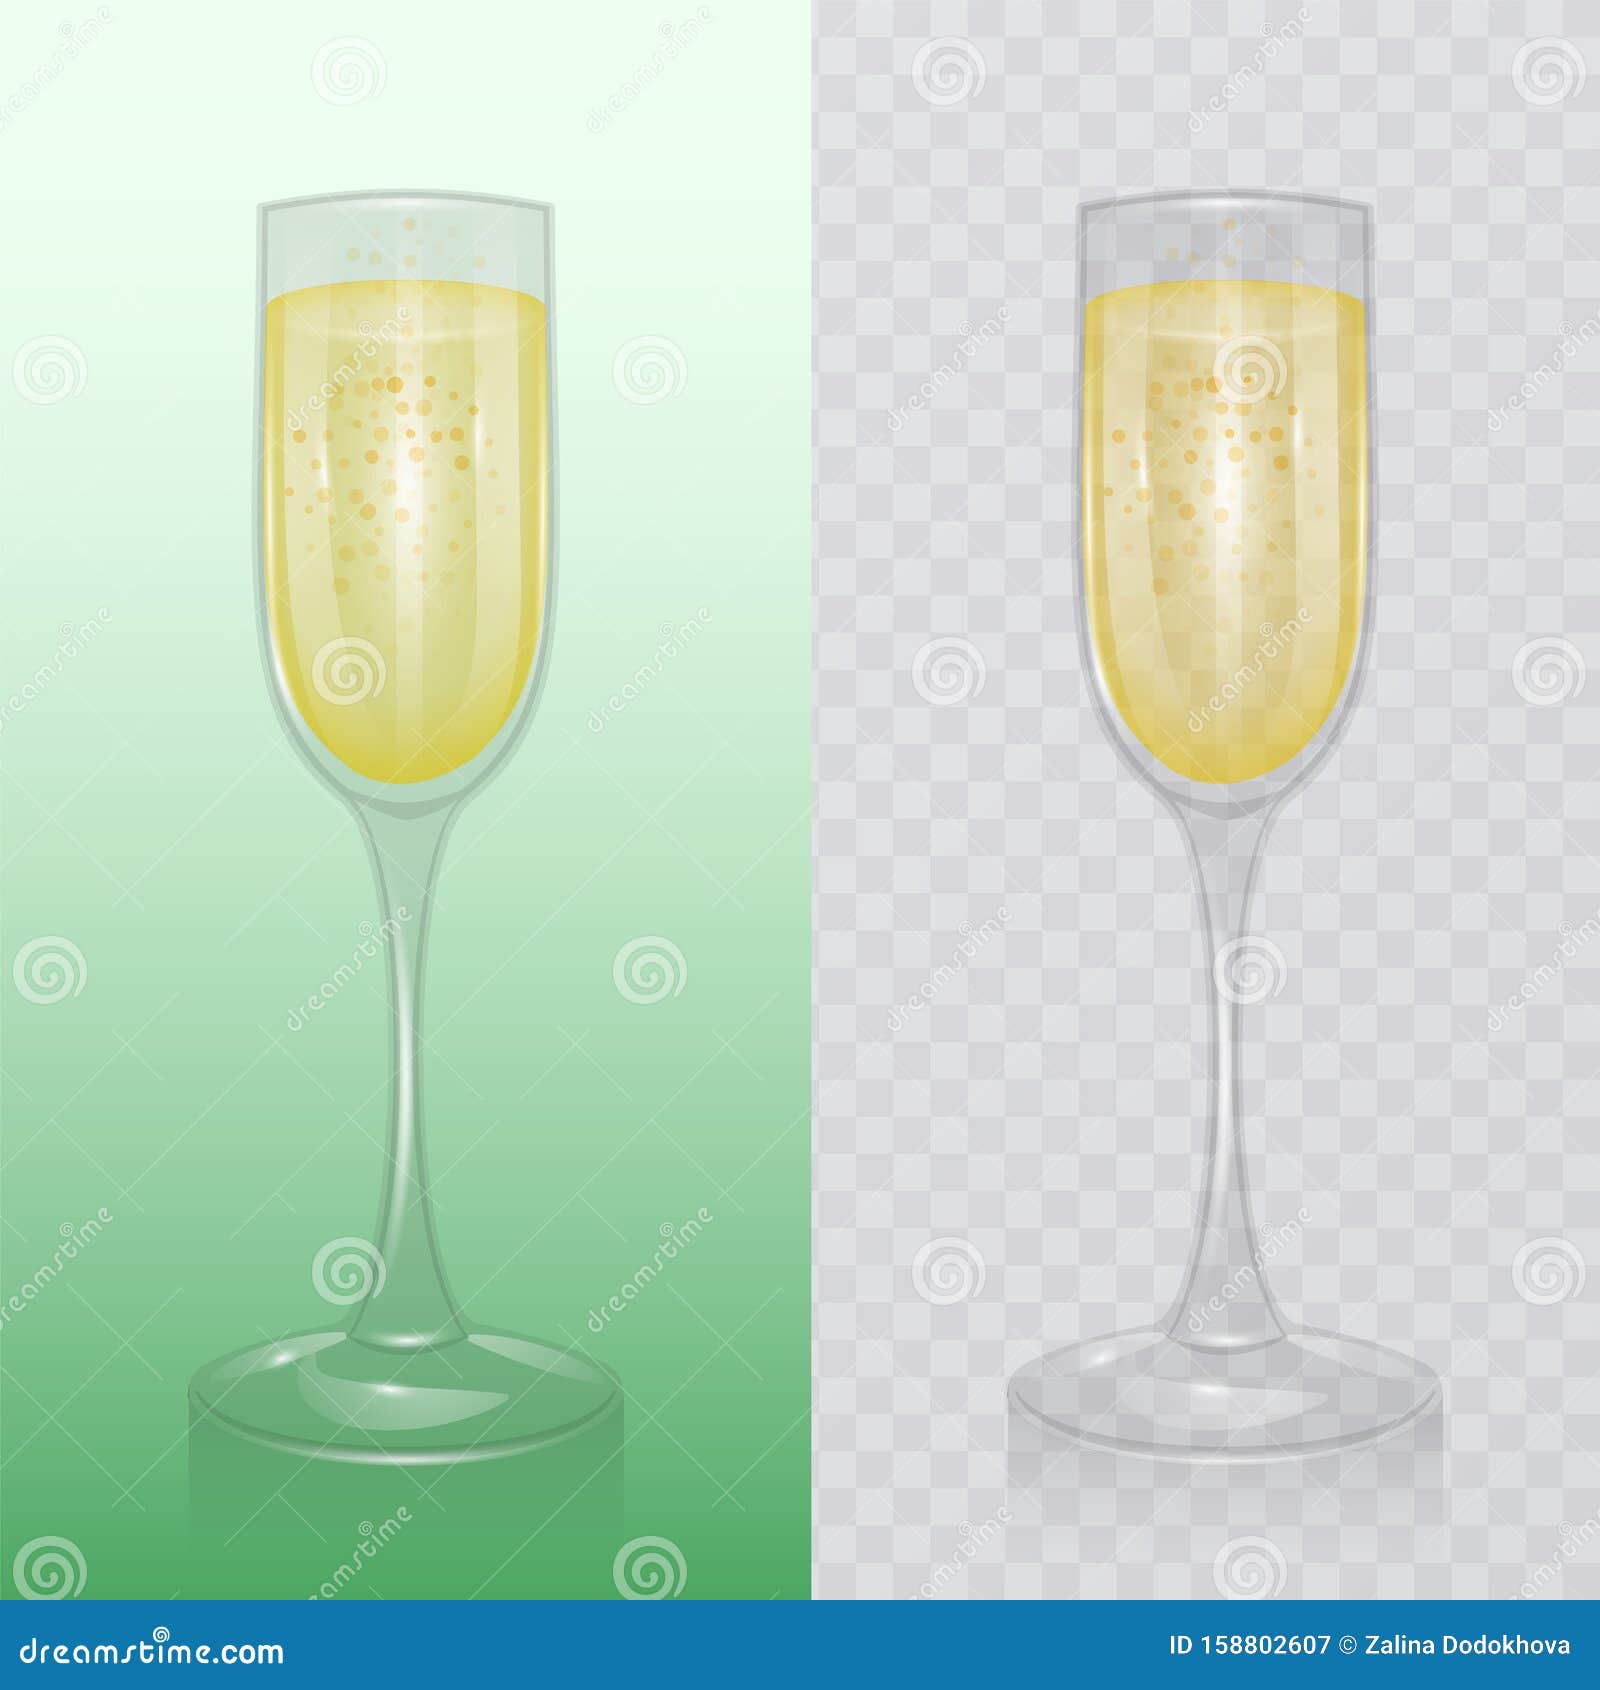 Download The Champagne Glass, Mock Up, Template Of Glassware For Alcoholic Drinks, Champagne Flute ...